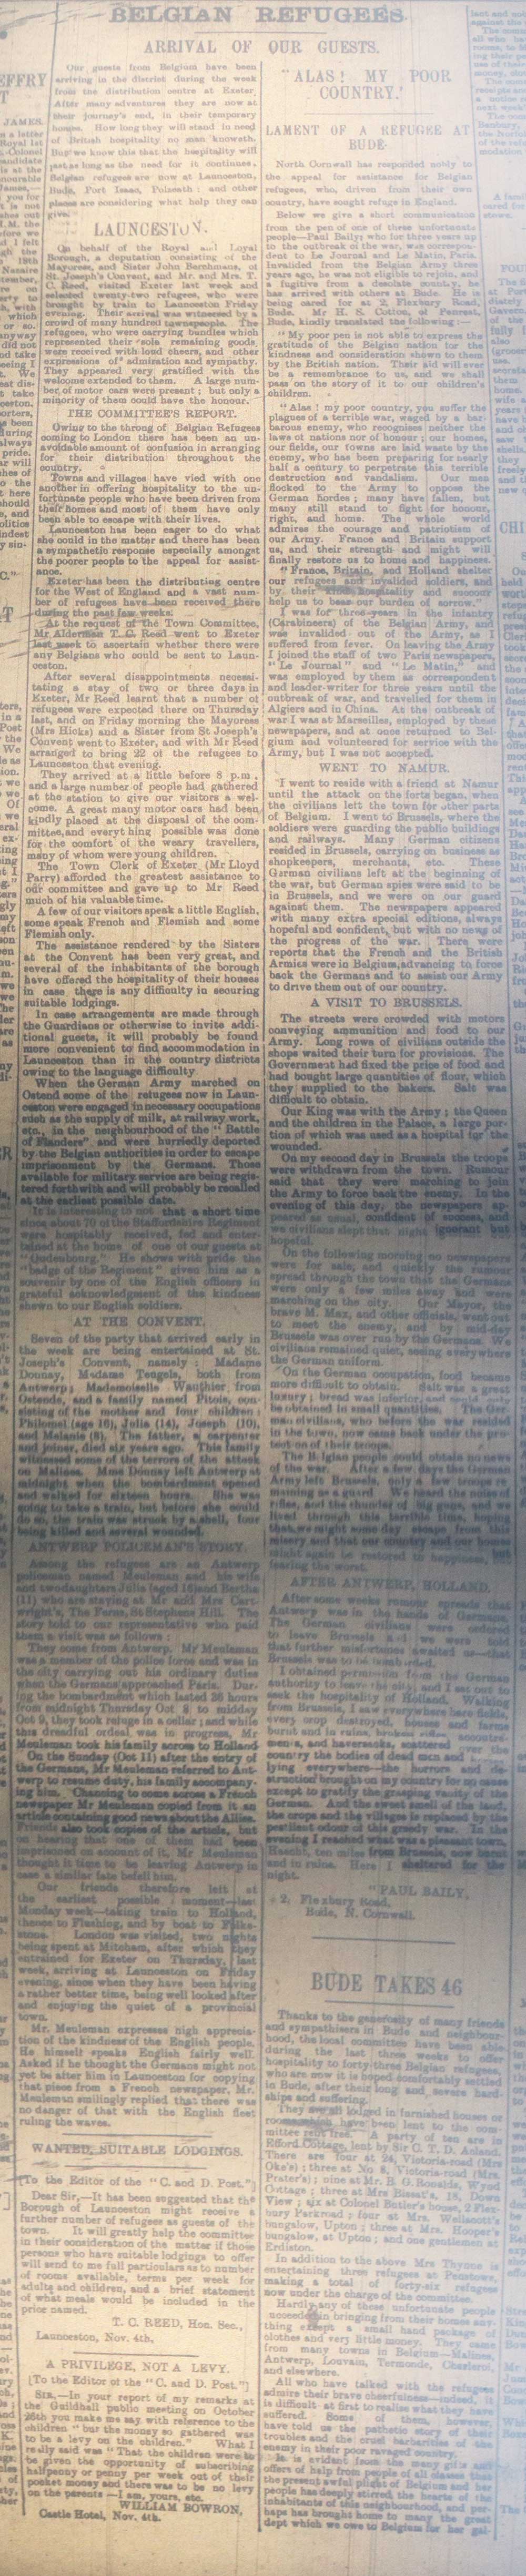 Belgium Refugee article from November 4th 1914